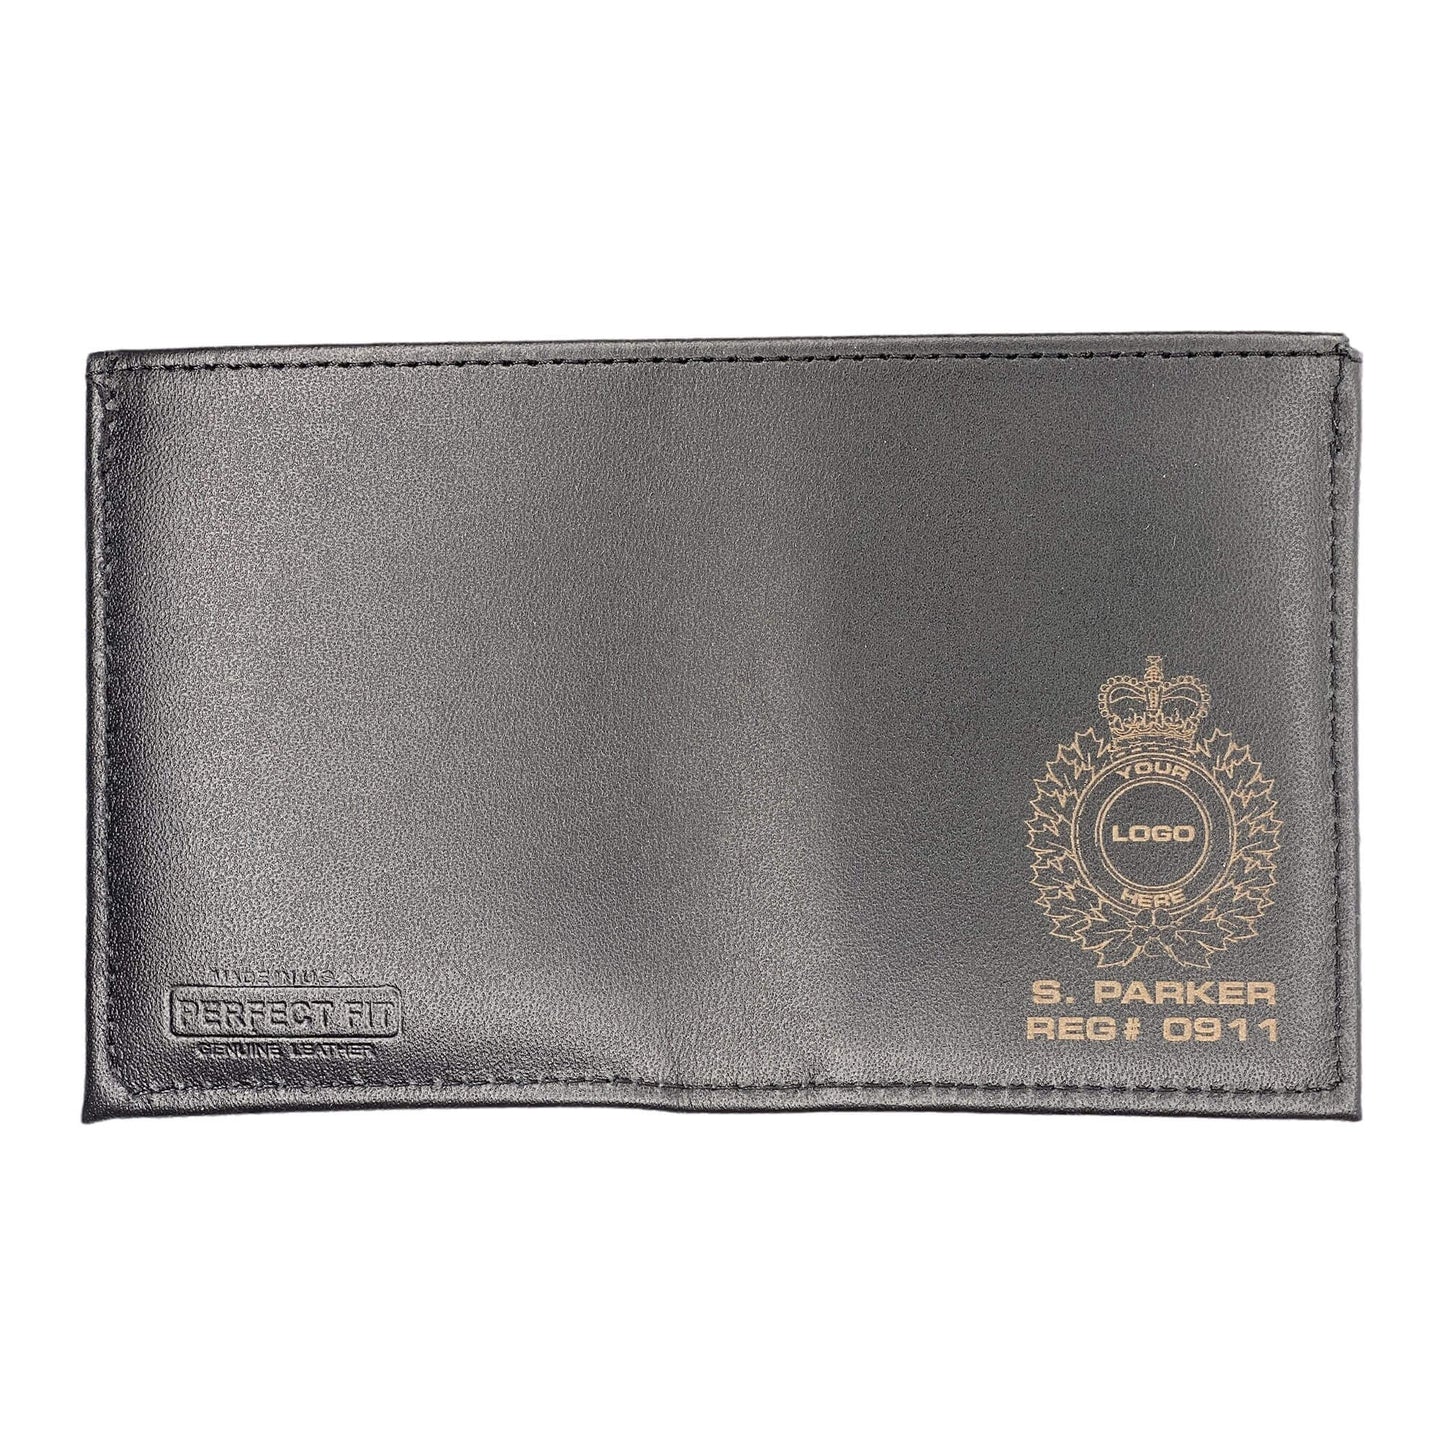 Fishery Officer New Zealand Badge Wallet